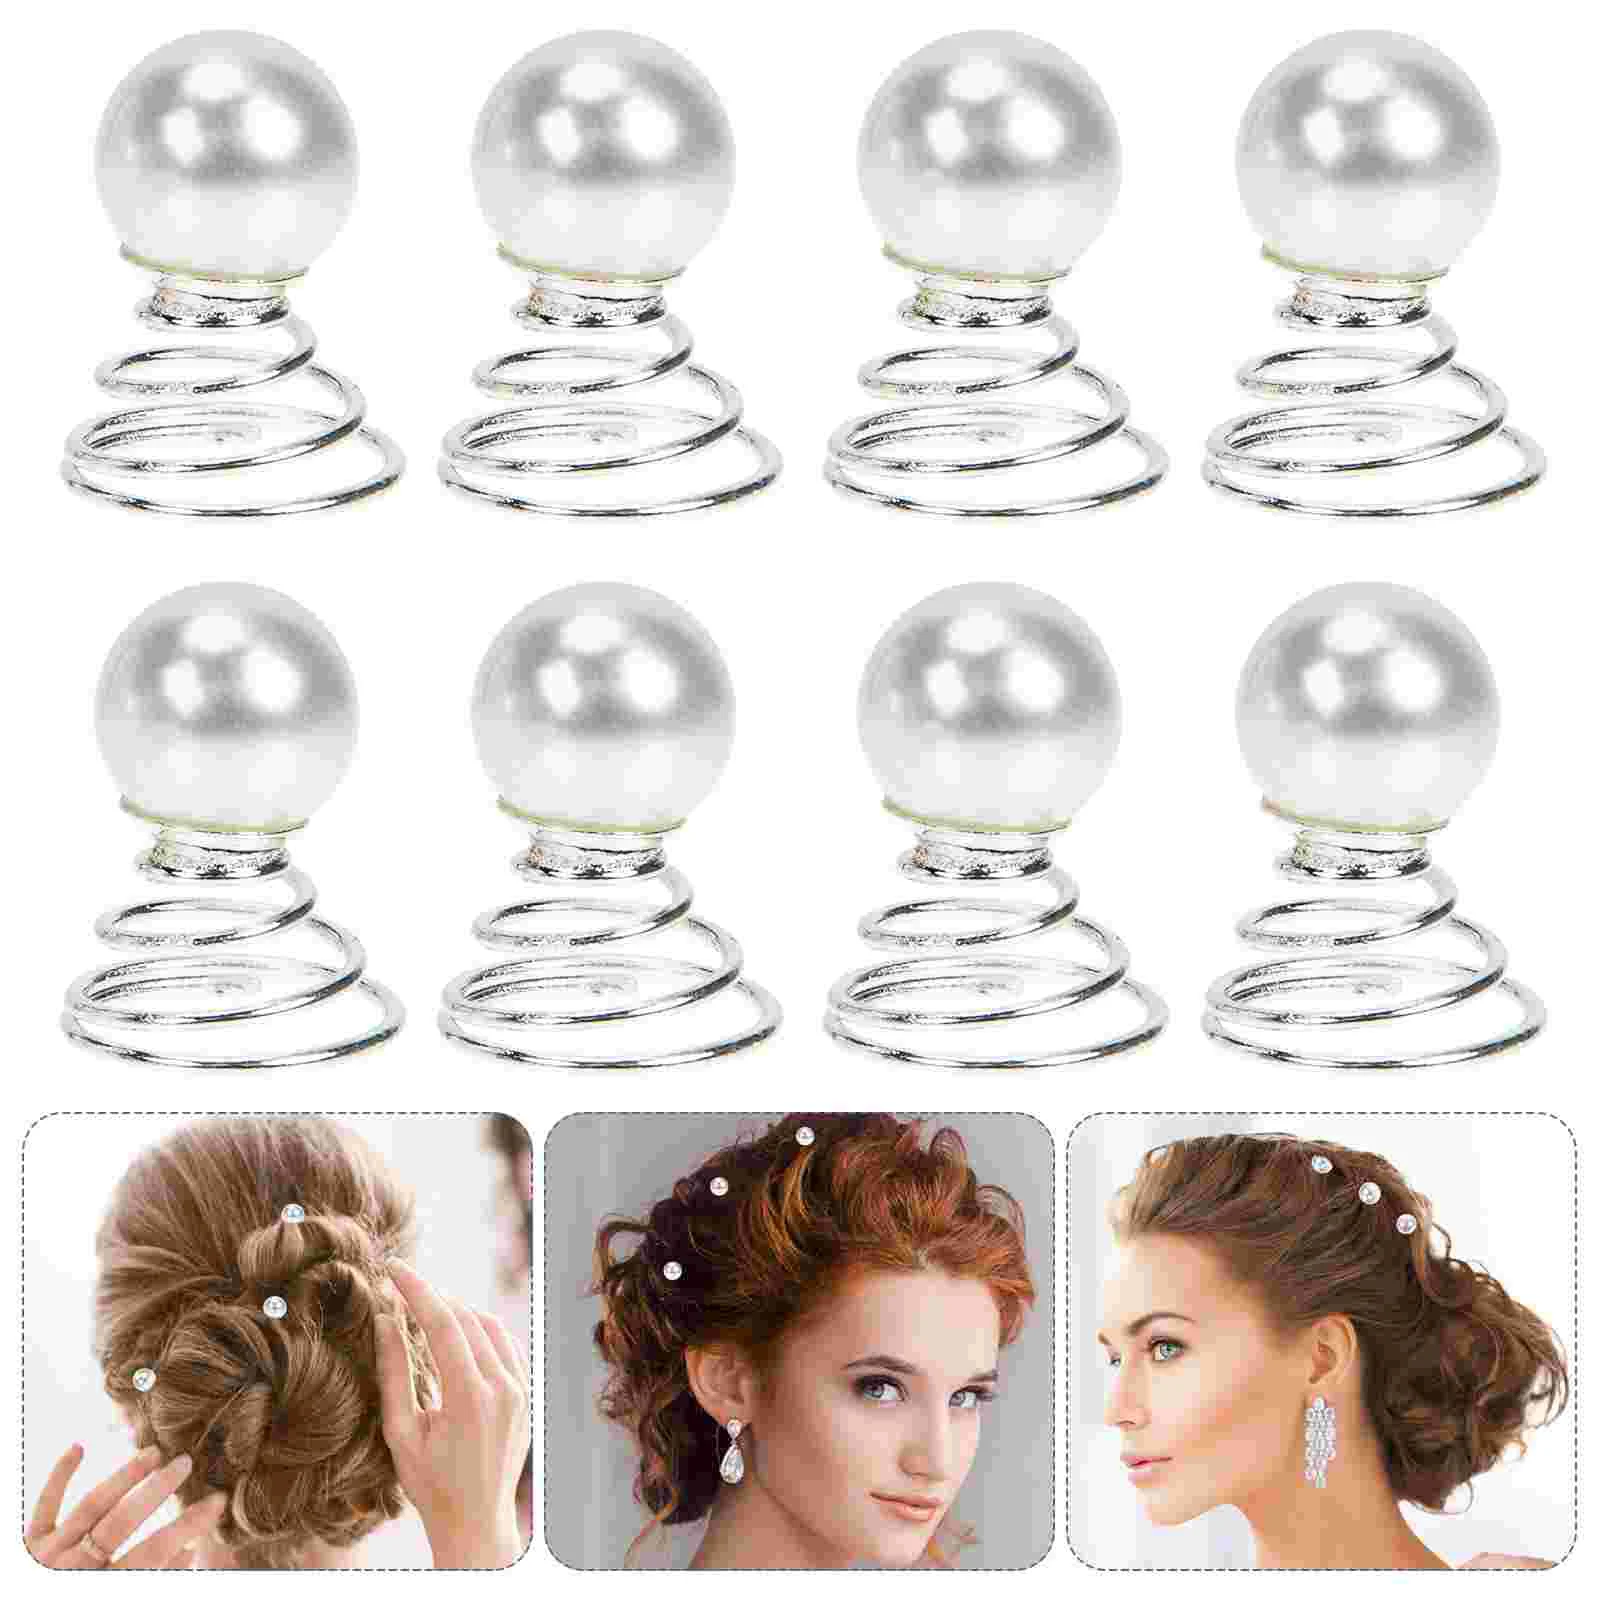 

20 Pcs Spiral Bean Clips Hair Frizz Bridal Accessories Styling Pearl Swirl Hairpin Alloy Trinkets